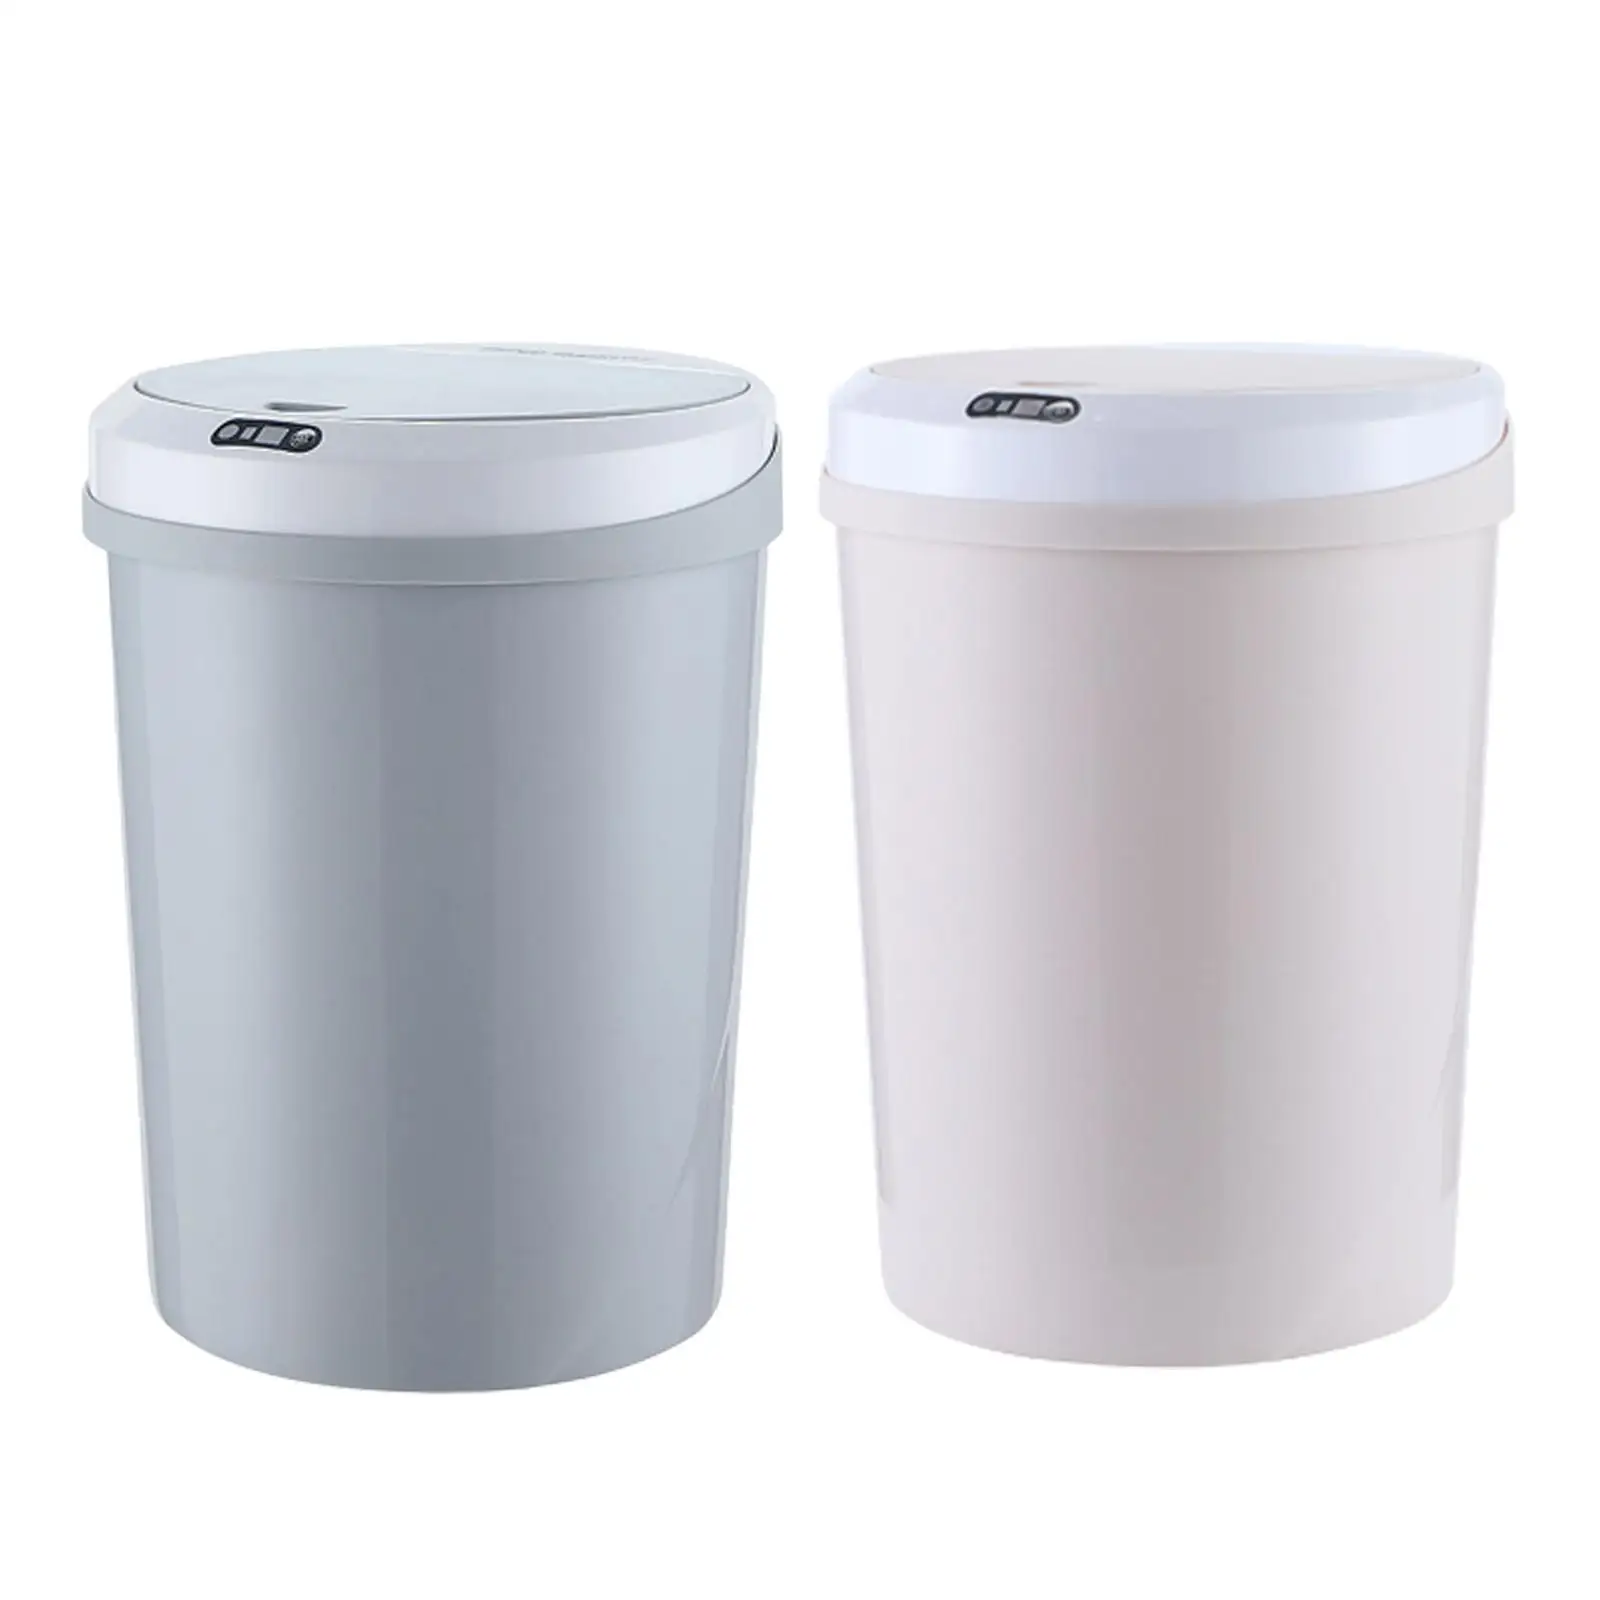 Touchless Garbage Bin 12L Garbage Bucket Sensor Trash Can Electric Garbage Can for Living Room Office Bathroom Toilet